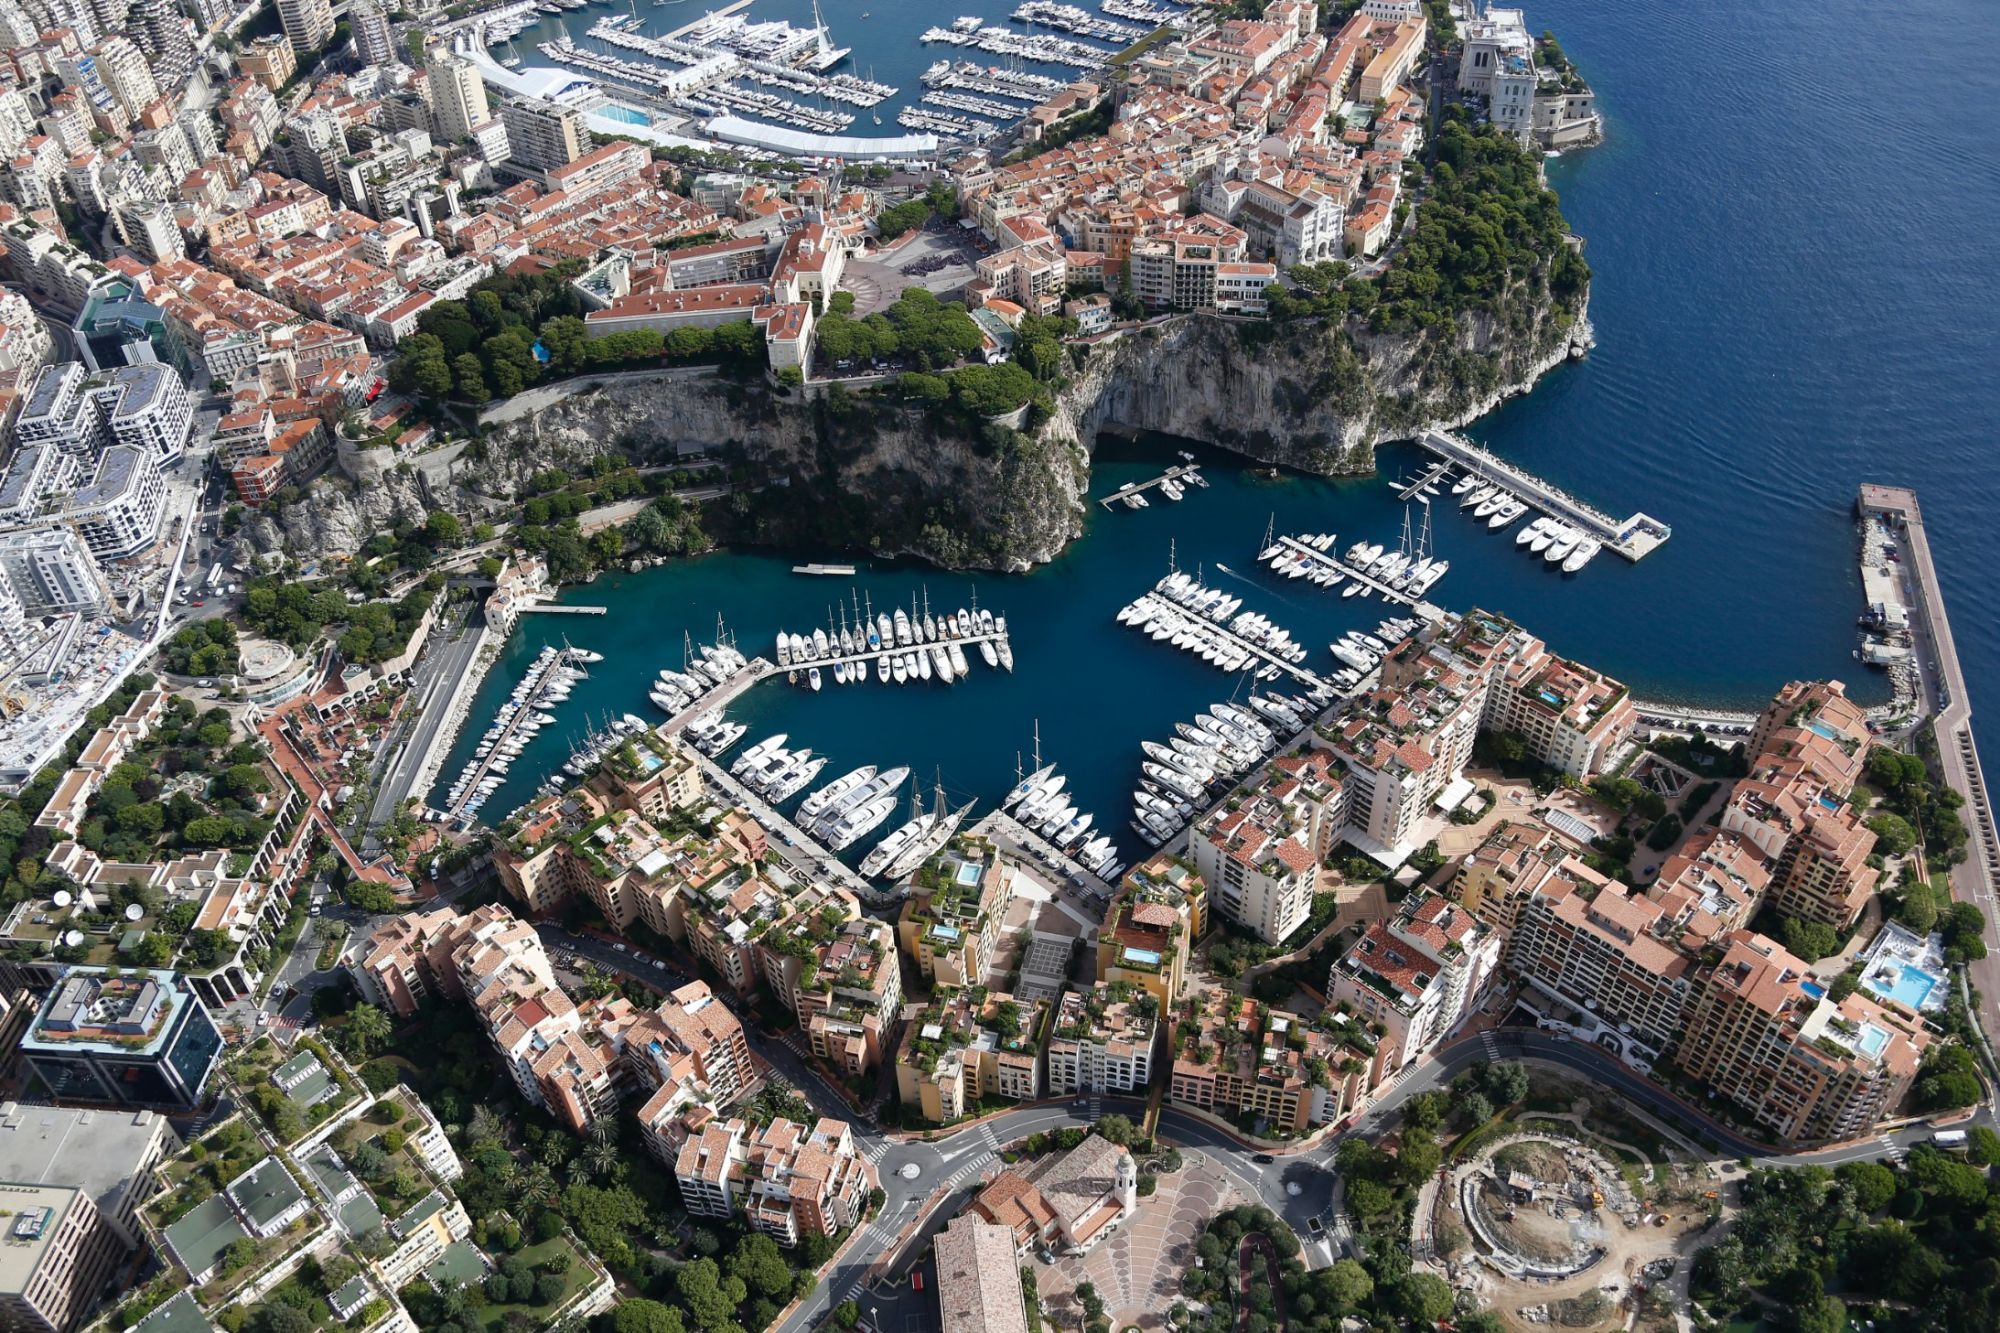 An aerial view of Monaco harbour